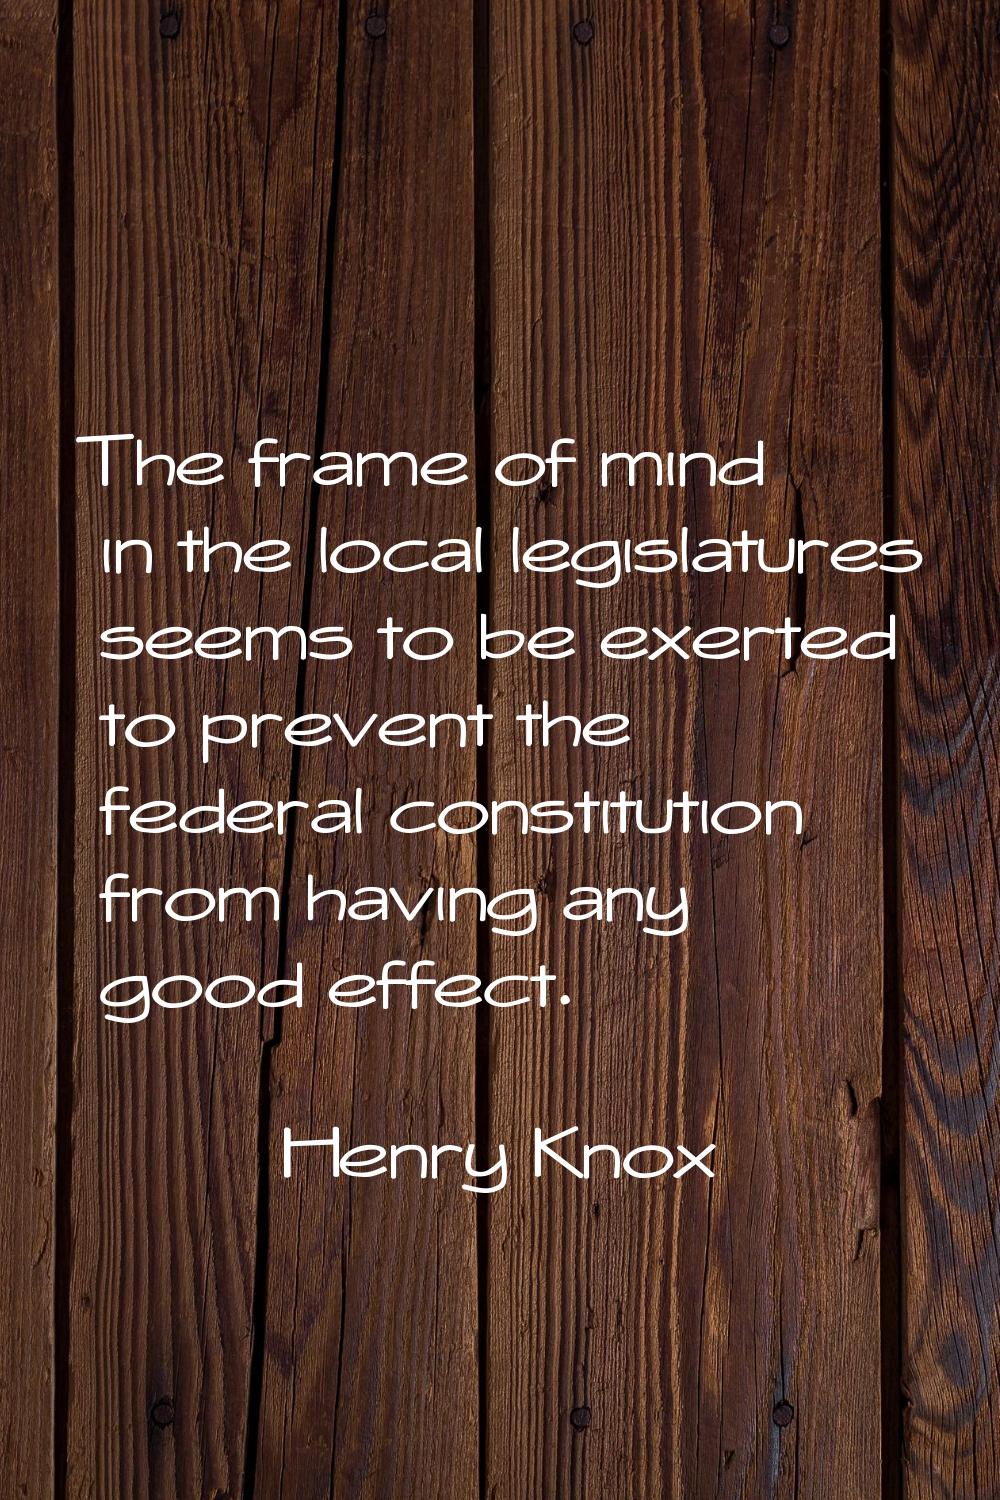 The frame of mind in the local legislatures seems to be exerted to prevent the federal constitution